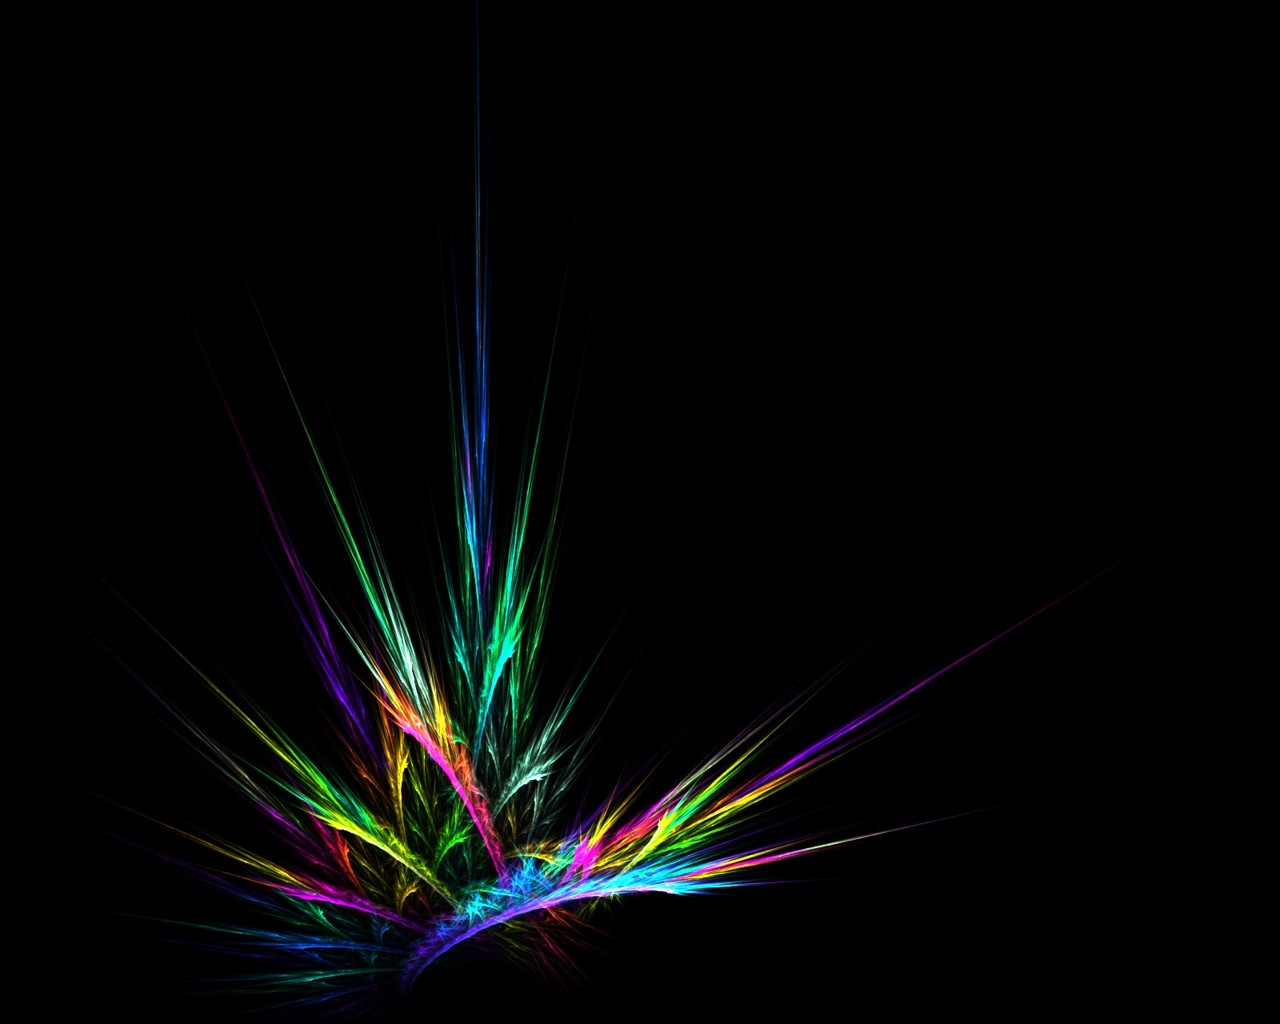 Black Abstract Wallpaper 2204 Hd Wallpapers in Abstract   Imagescicom